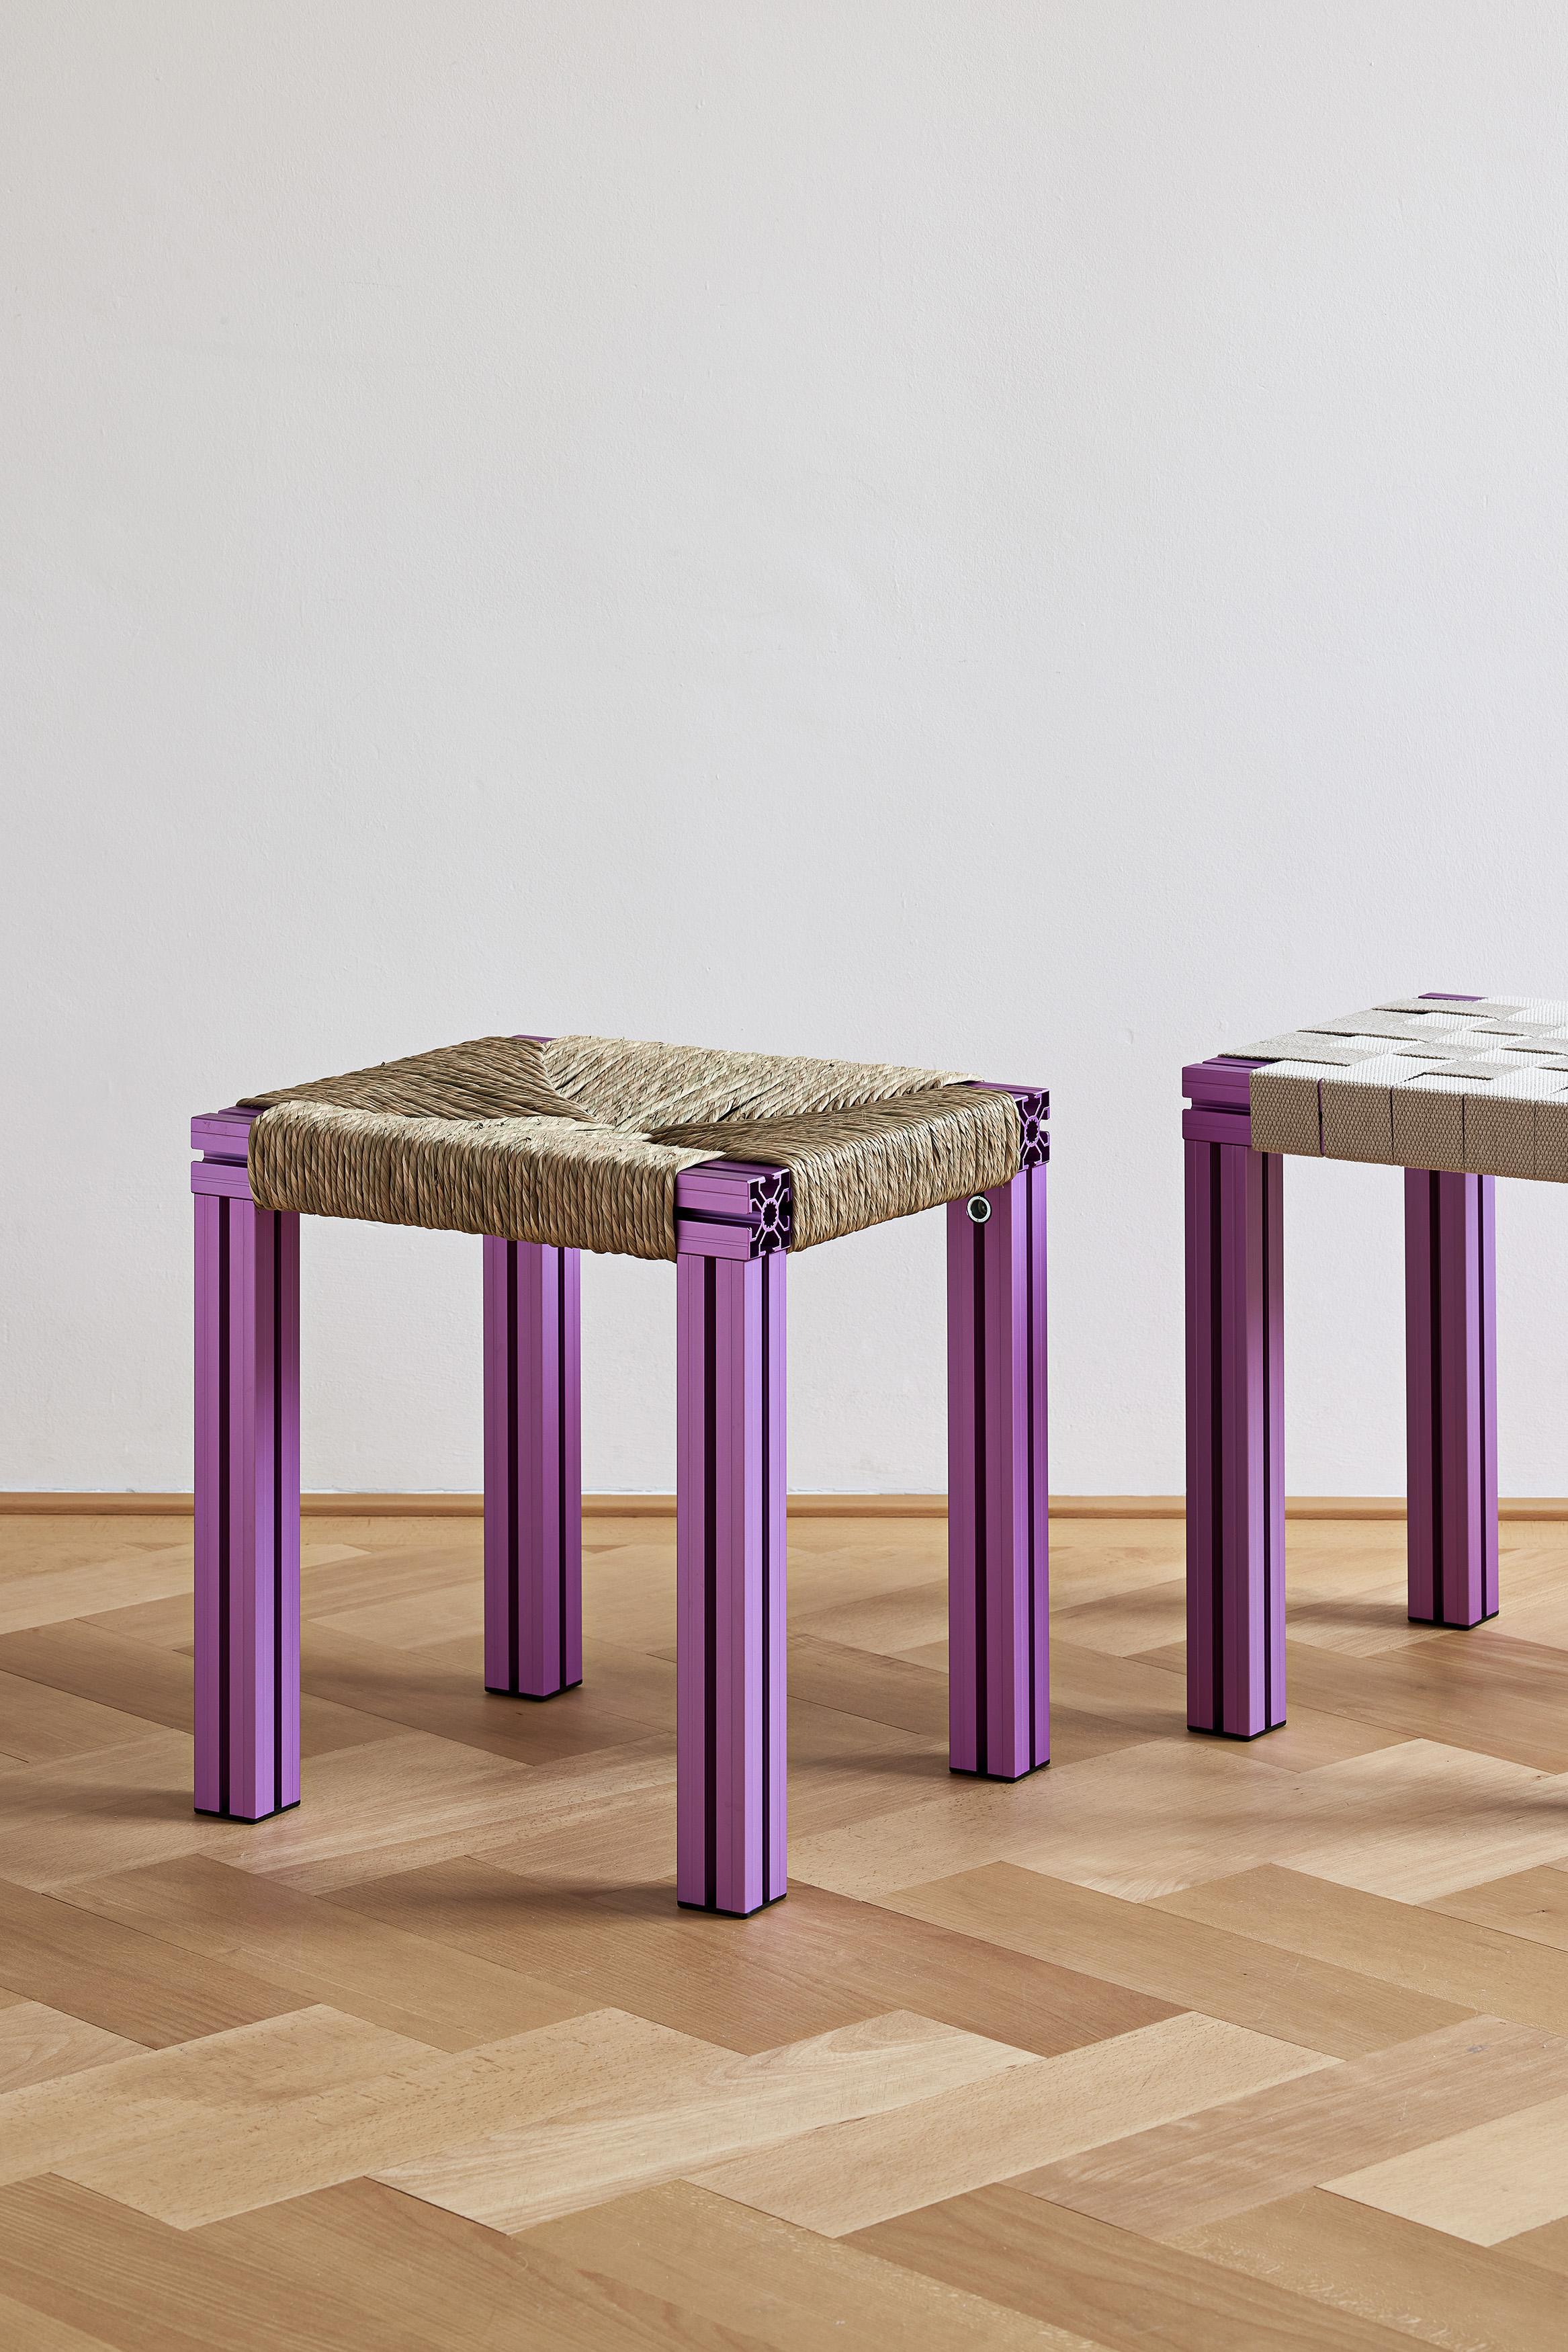 Polished Aluminium Stool with Reel Rush Seating from Anodised Wicker Collection For Sale 1